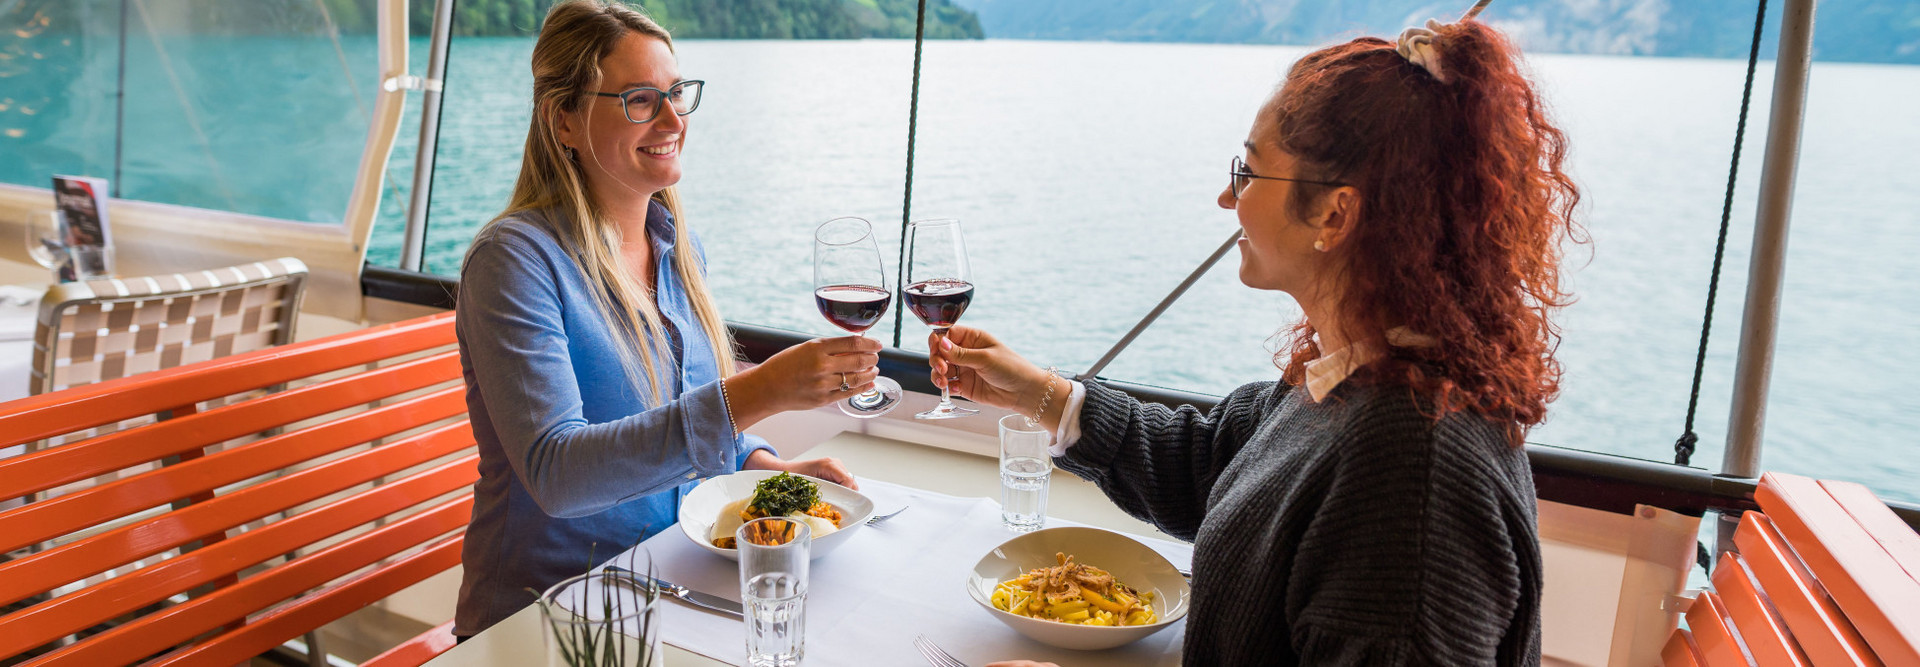 Two young women enjoy the gastronomic offer on the ship and toast with a glass of red wine.